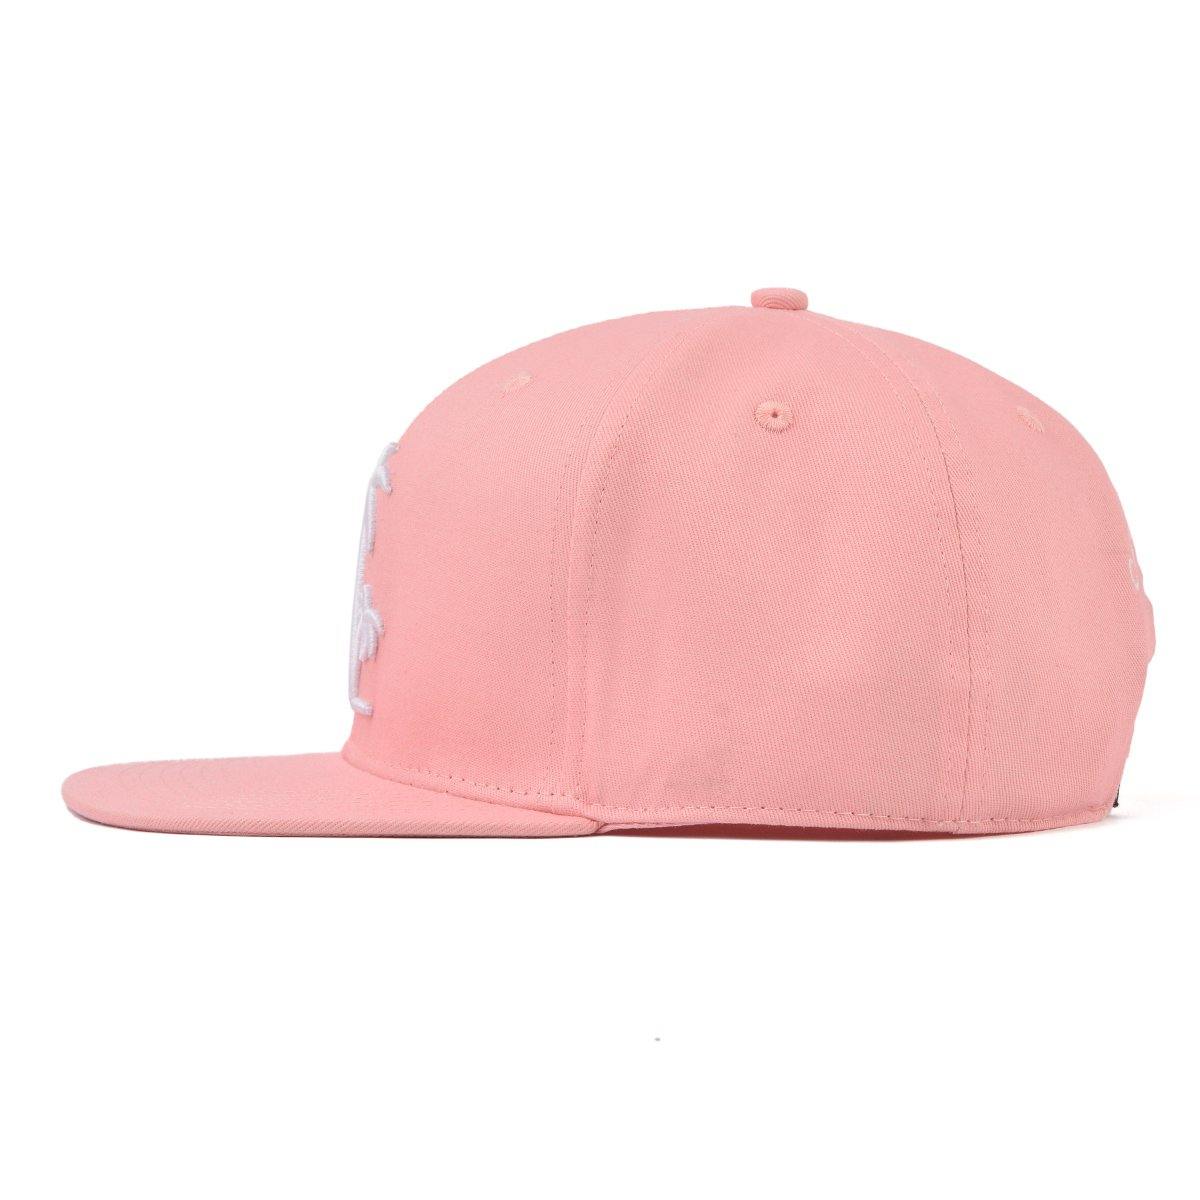 Pink Palm snapback hat for babies, toddlers, kids and women. Cubs & Co. Australia